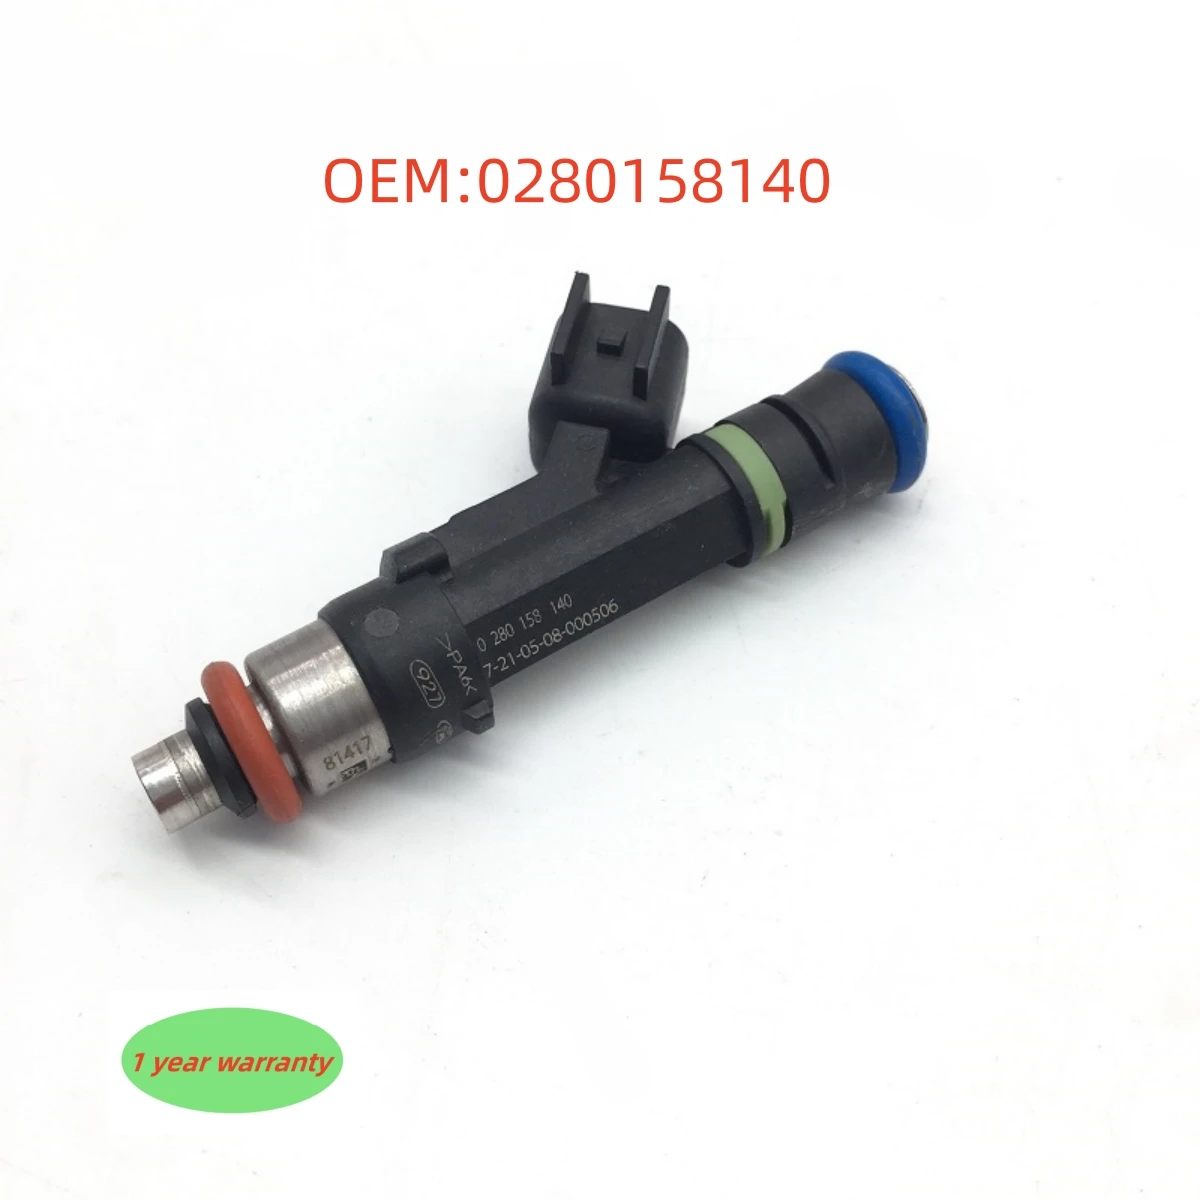 

8pcs Fuel Injectors 0280158140 NEW For FORD Expedition 07-08 5.4L Car Engine Nozzle Injectors High Performance Fuel Injection